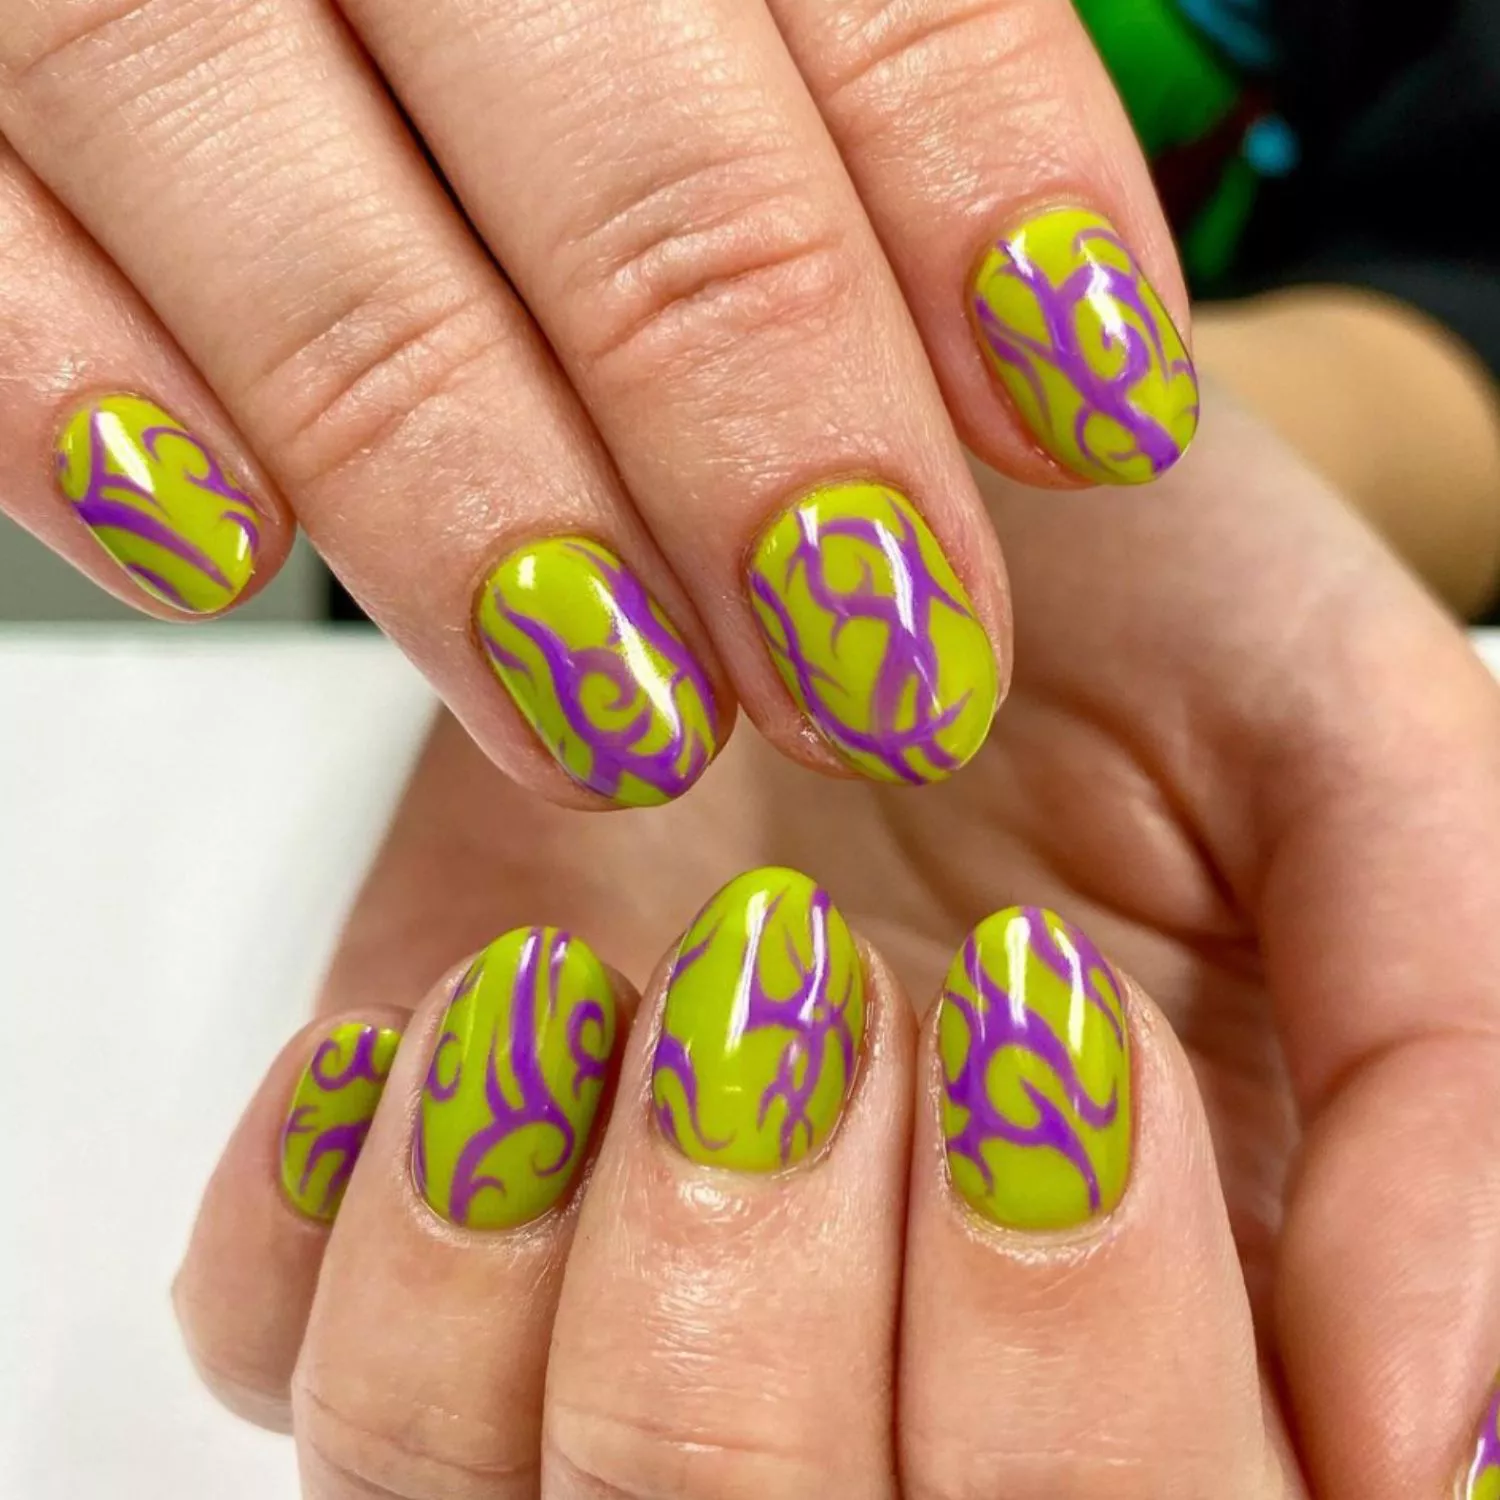 Lime green nails with neon purple swirling flame design